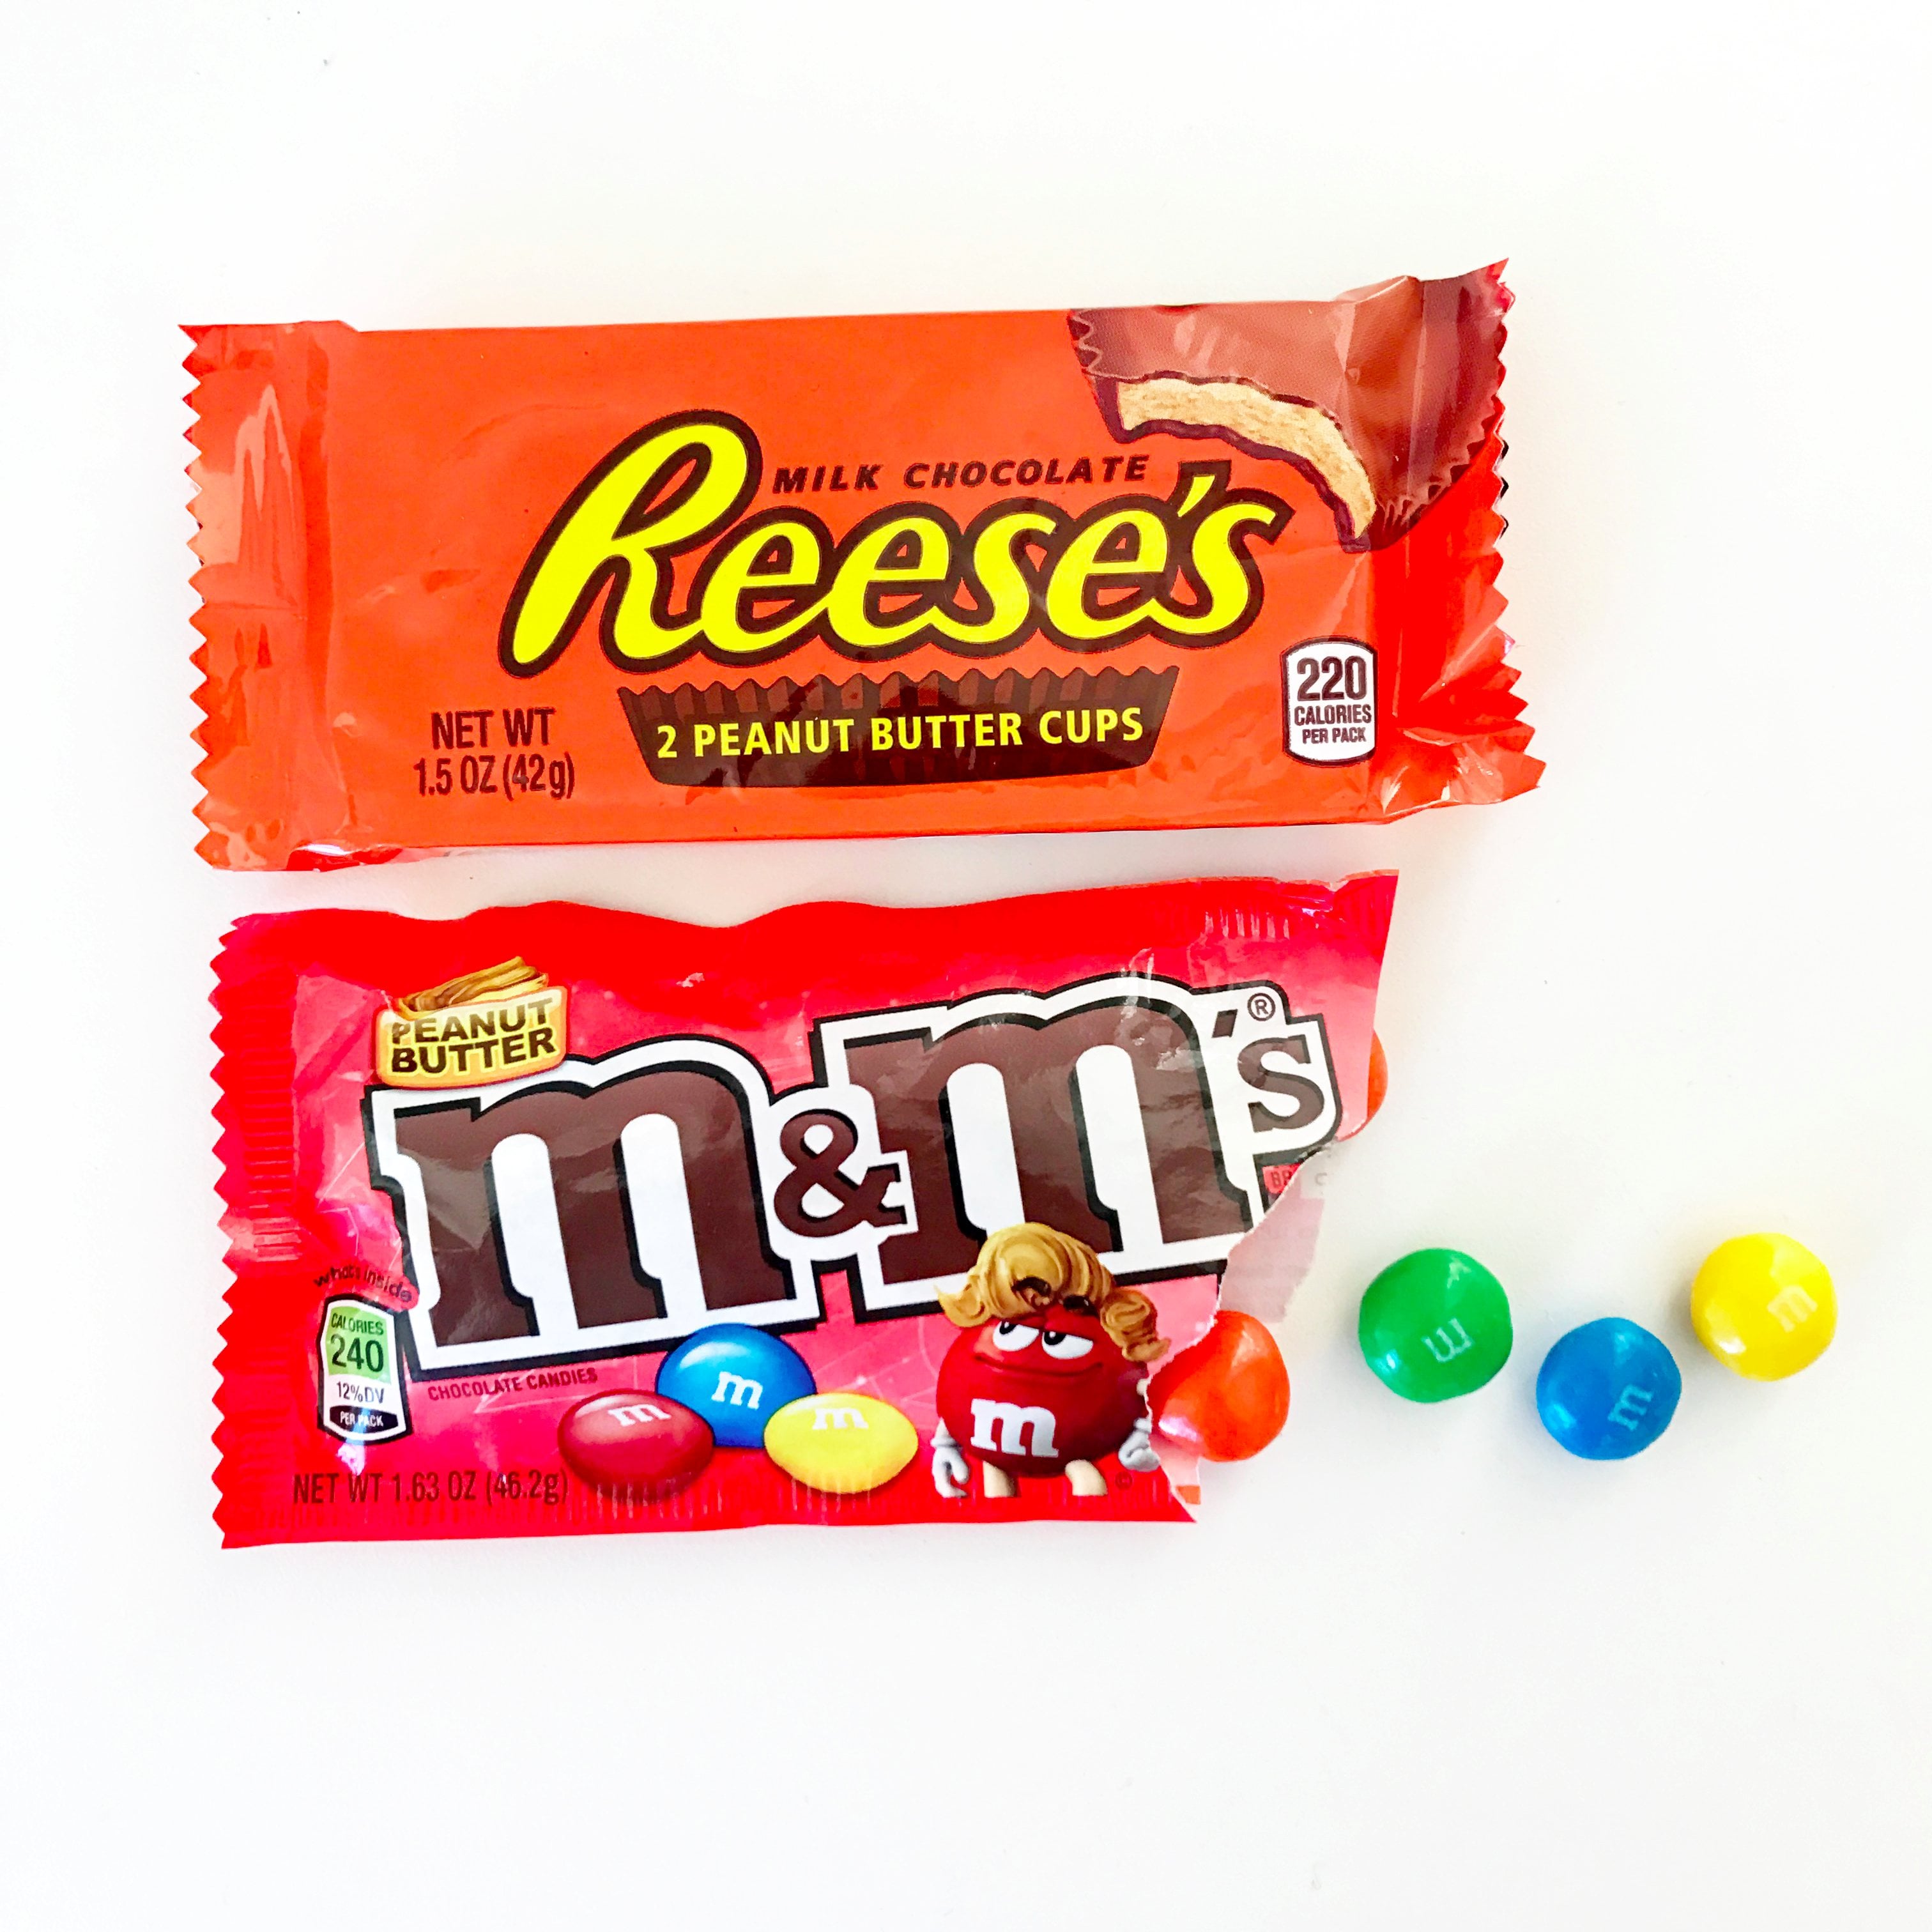 You can now get M&M's and Snickers peanut butters